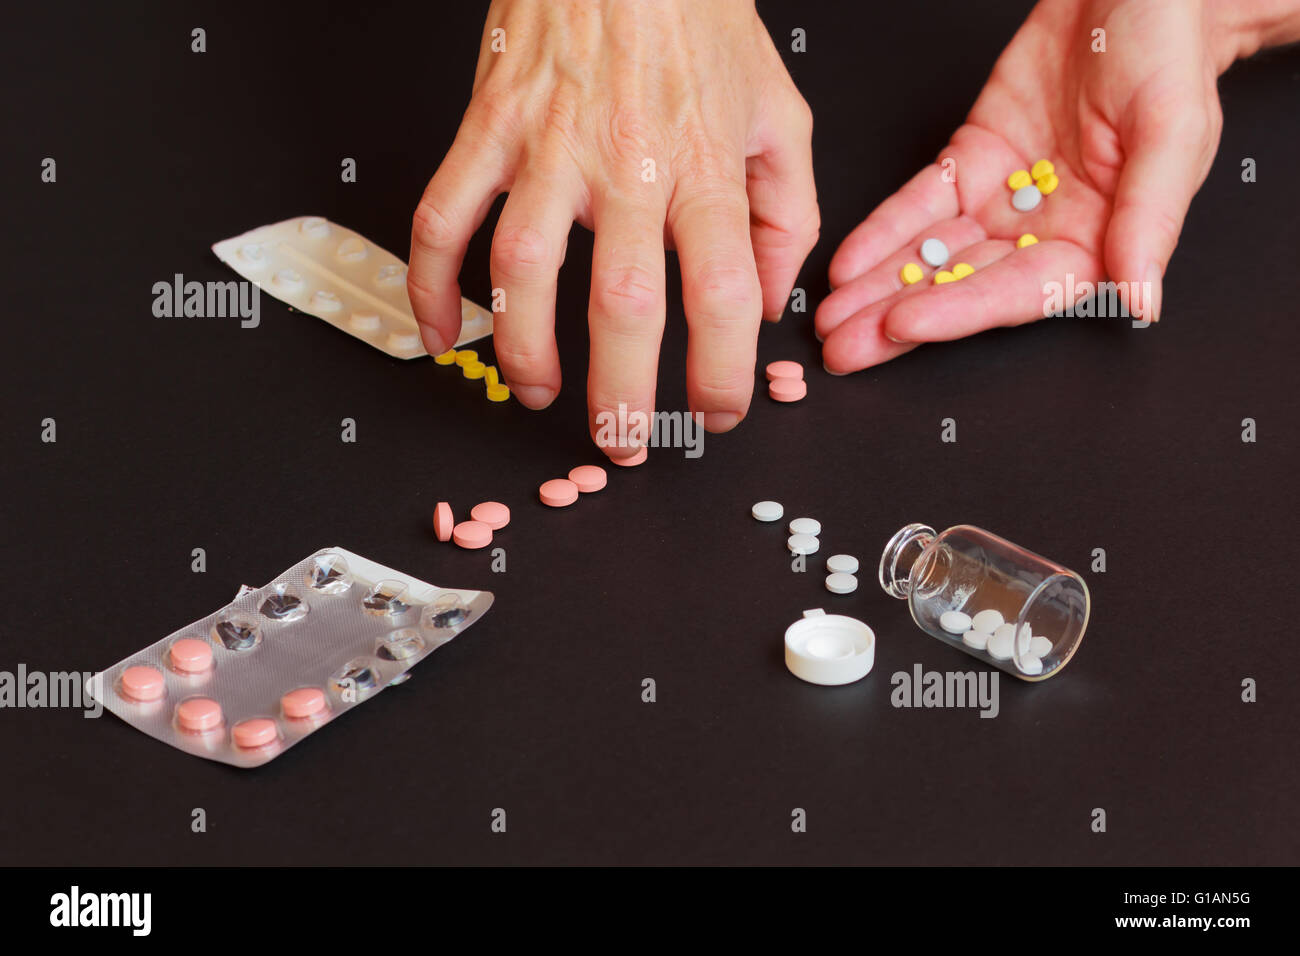 a woman collects too many tablets from jars and blisters Stock Photo